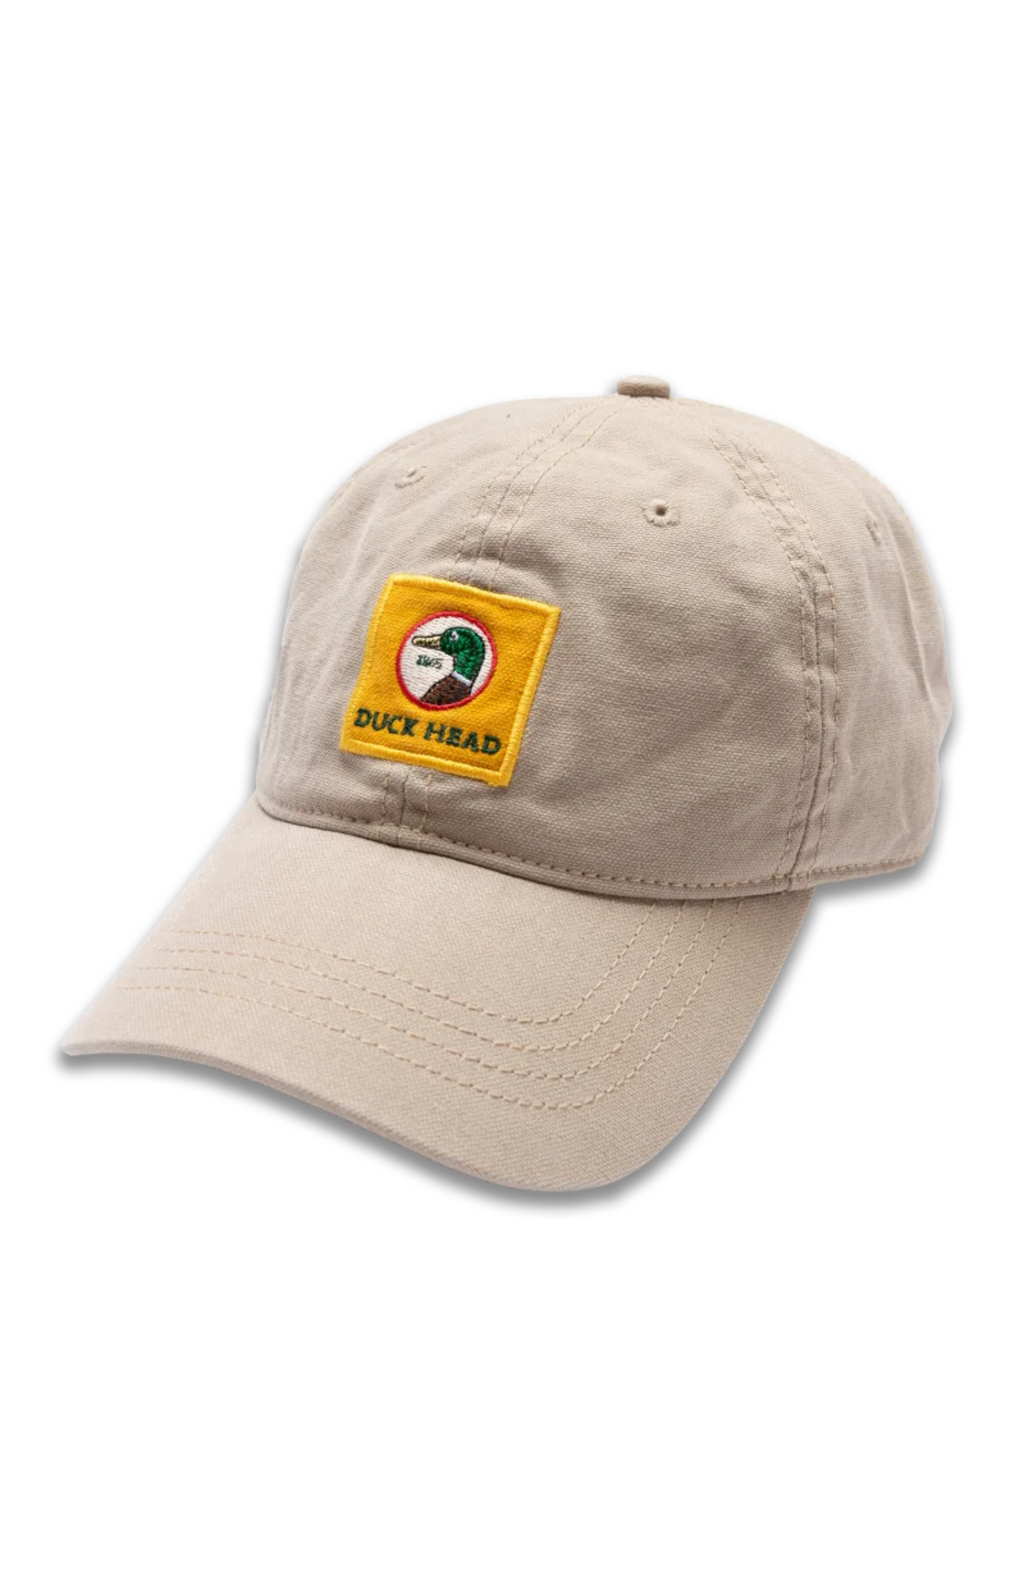 Duck Head - Gold Patch Canvas Hat